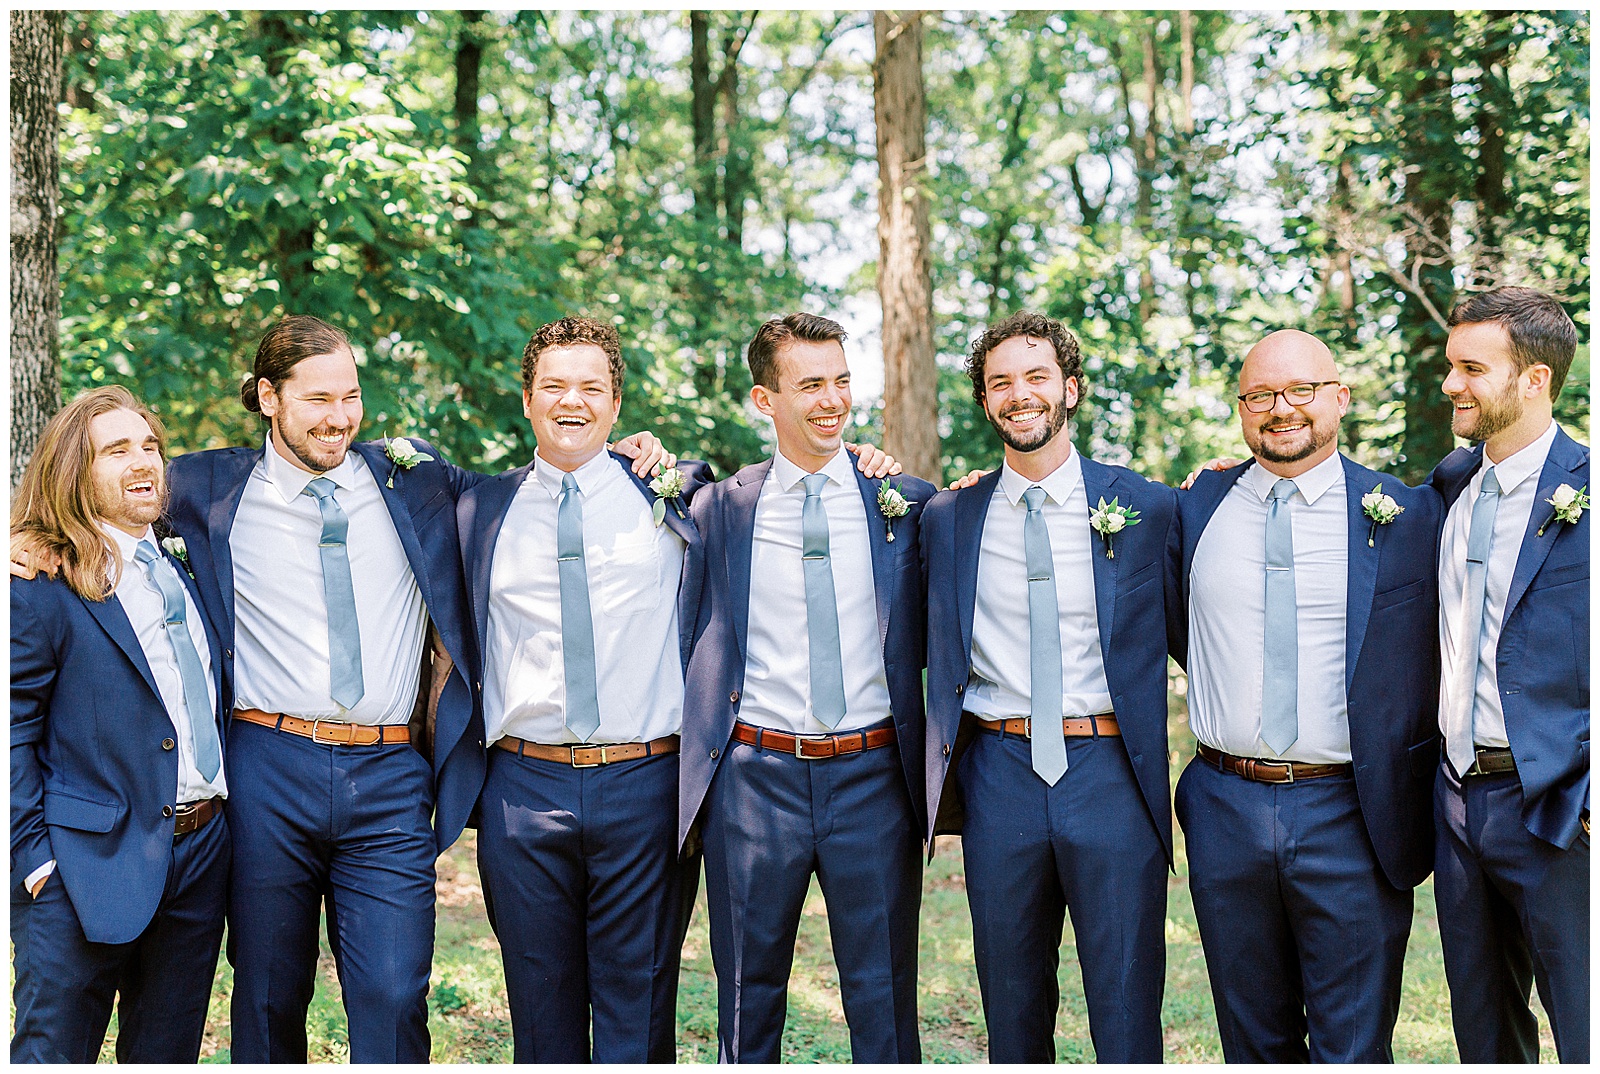 navy blue suits for groomsmen group photos laughing outdoors